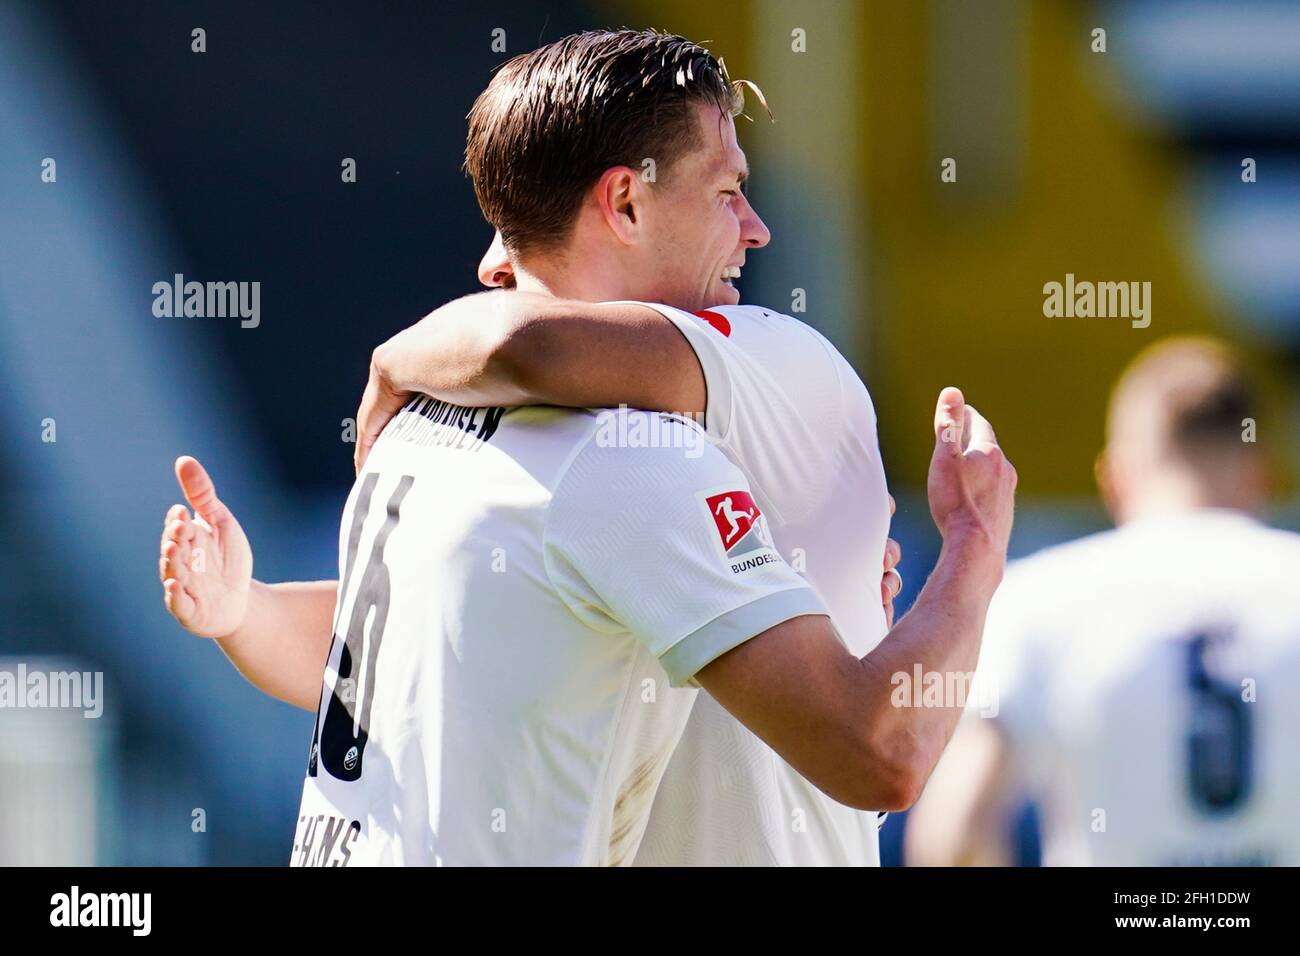 Sandhausen, Germany. 25th Apr, 2021. Football: 2nd Bundesliga, SV Sandhausen - Hannover 96, Matchday 31, Hardtwaldstadion. Sandhausen's goal scorer Kevin Behrens celebrates the goal for the final score of 4:2. Credit: Uwe Anspach/dpa - IMPORTANT NOTE: In accordance with the regulations of the DFL Deutsche Fußball Liga and/or the DFB Deutscher Fußball-Bund, it is prohibited to use or have used photographs taken in the stadium and/or of the match in the form of sequence pictures and/or video-like photo series./dpa/Alamy Live News Stock Photo